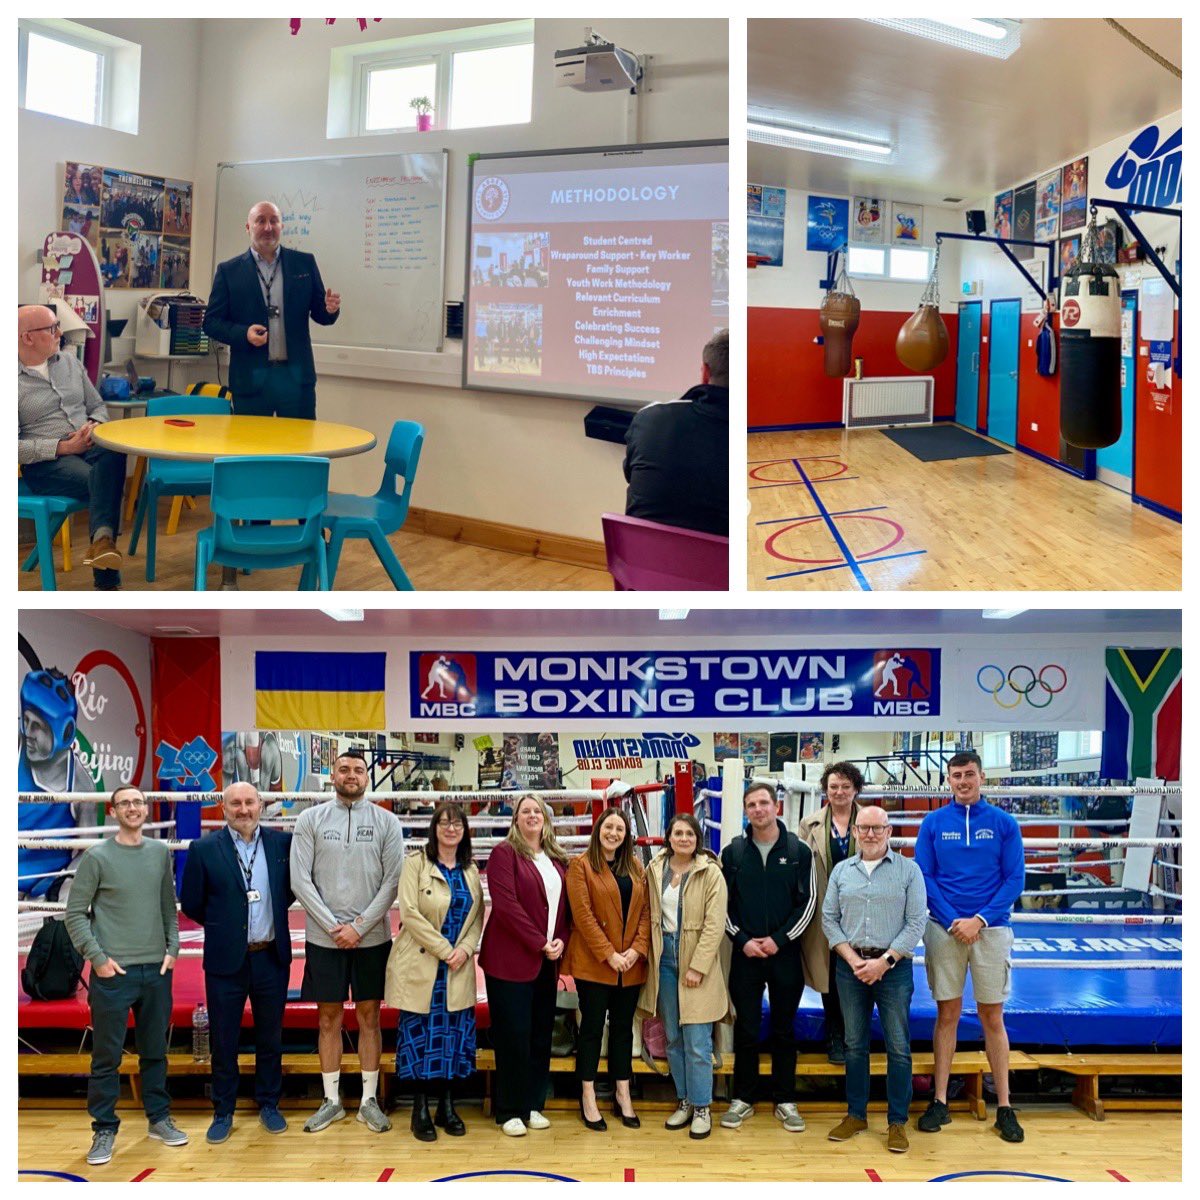 Inspired by the collaborative work between @monkstownboxing and Abbey Community college #Belfast and the work they do across the wider community “we build champions inside and outside the ring” Thankyou for hosting Taking Boys Seriously @EduDetective @sukimorg